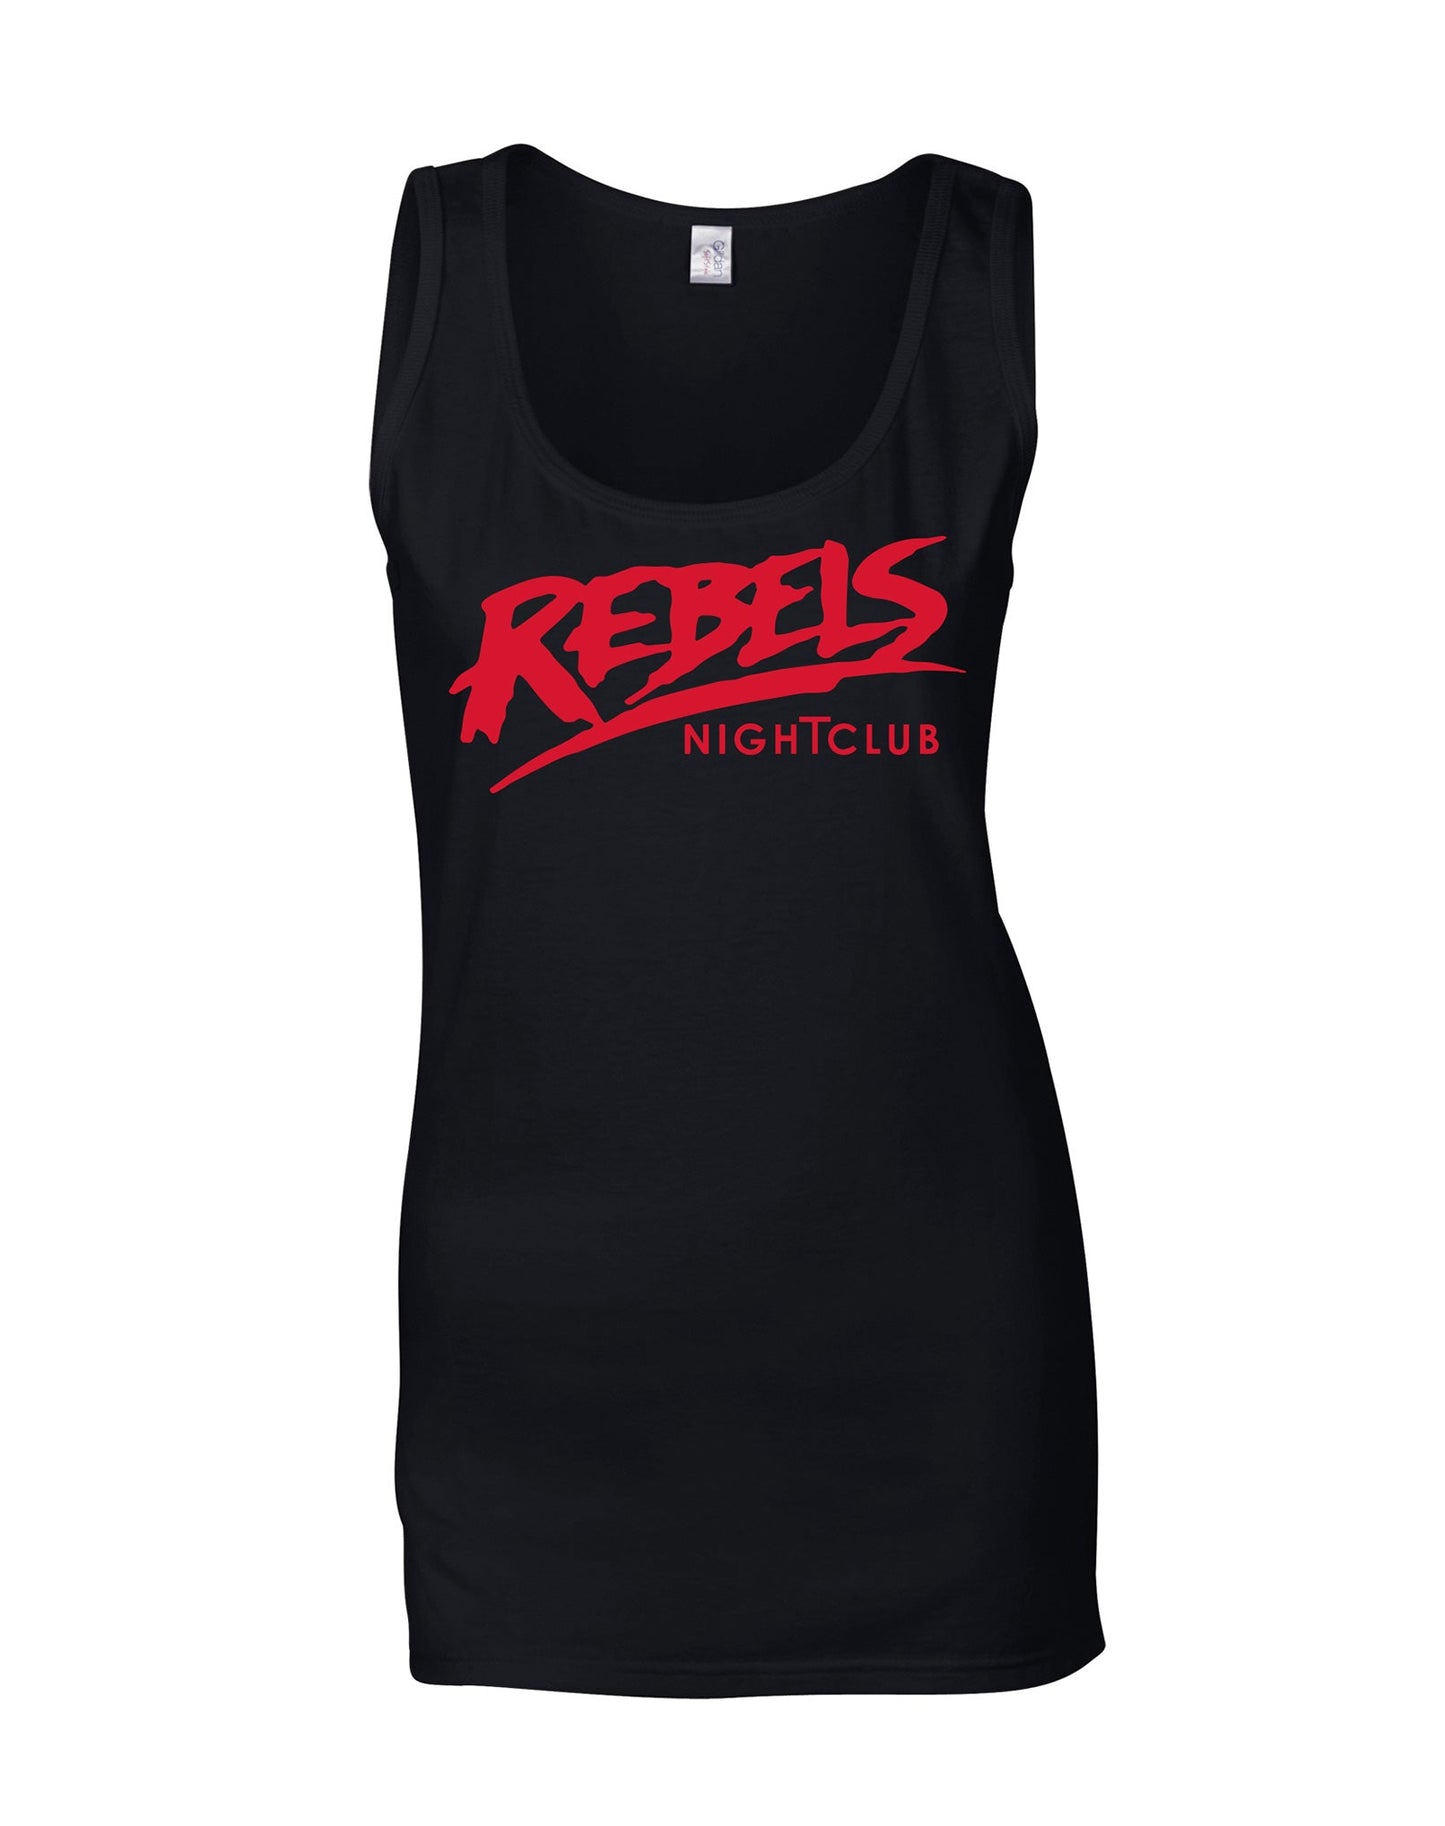 Rebels nightclub sign ladies fit vest - various colours - Dirty Stop Outs